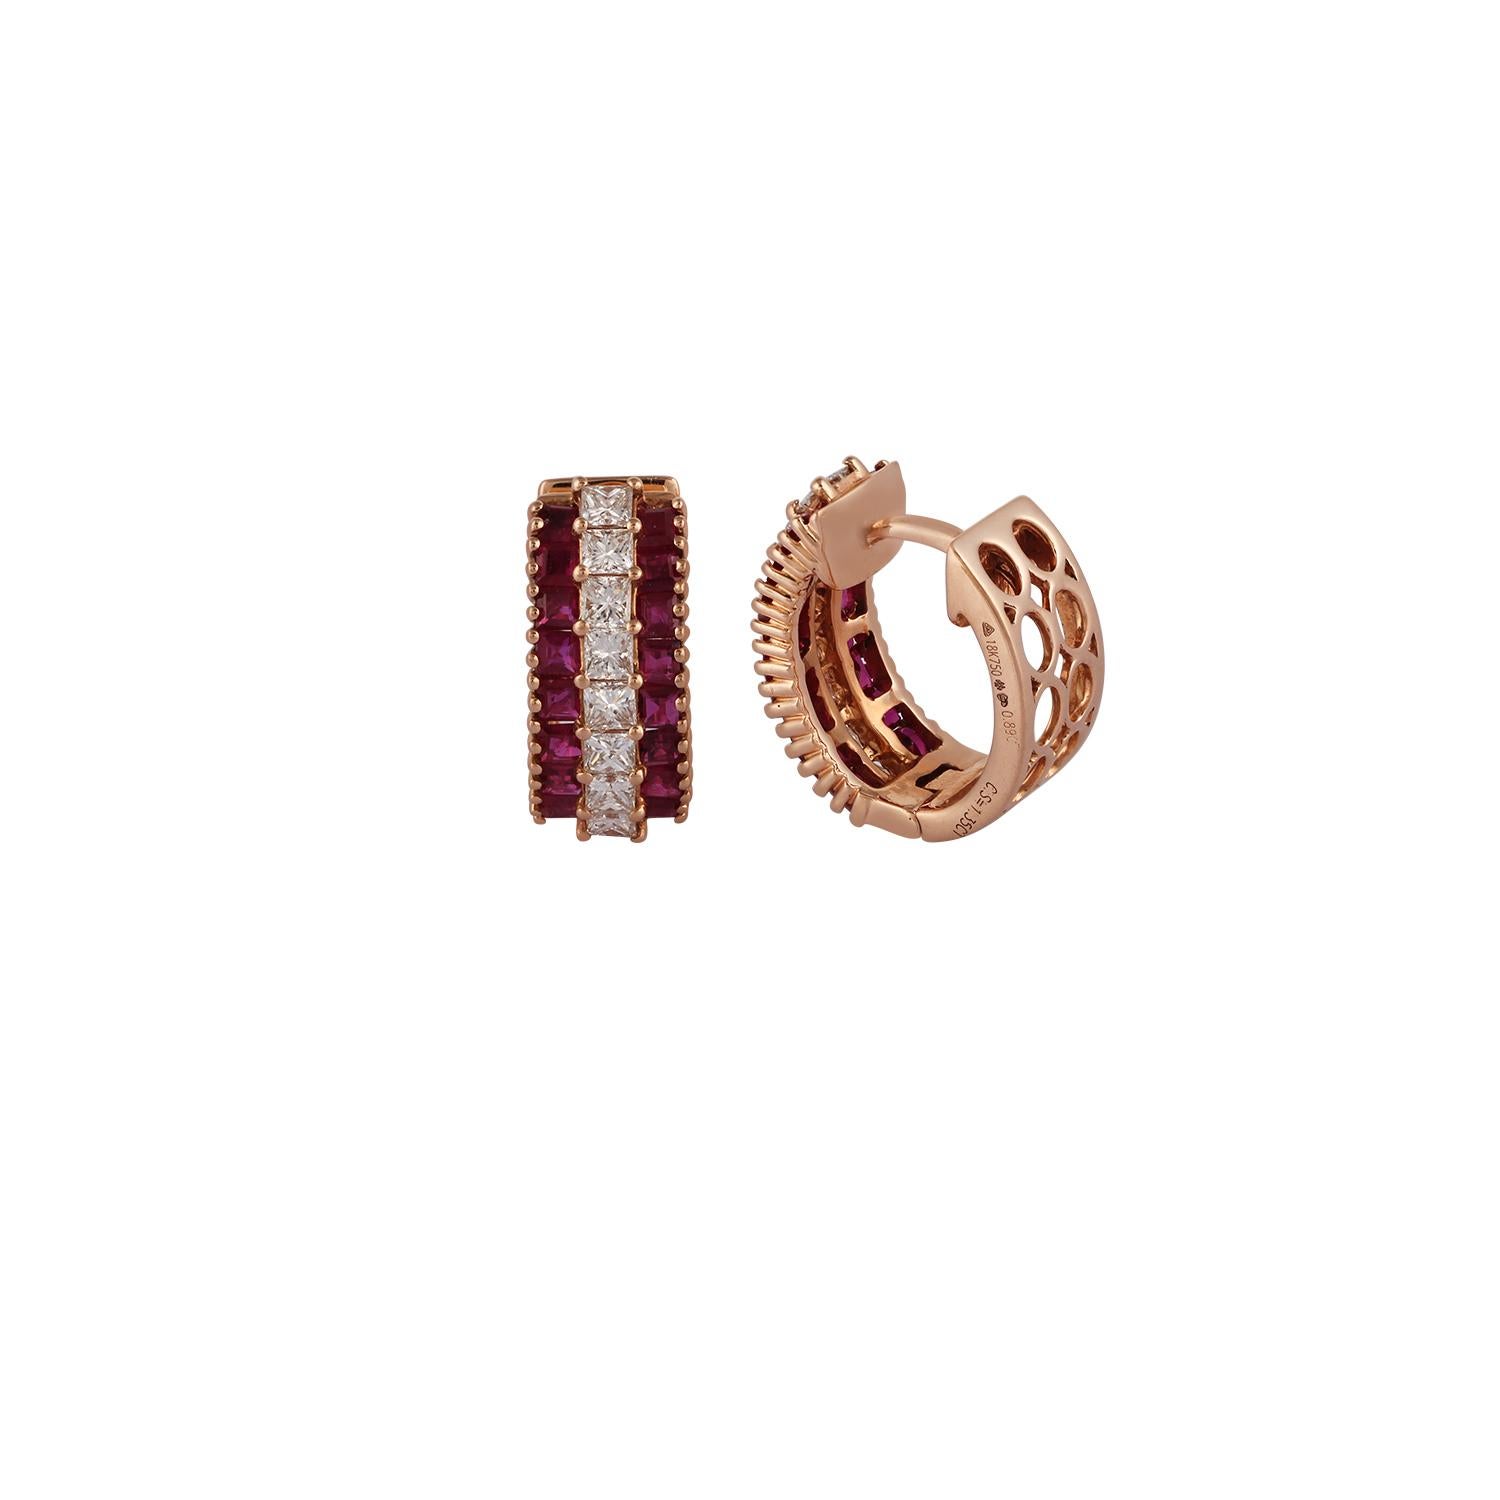 Square Cut Ruby and Diamond Earrings Studded in 18 Karat Rose Gold